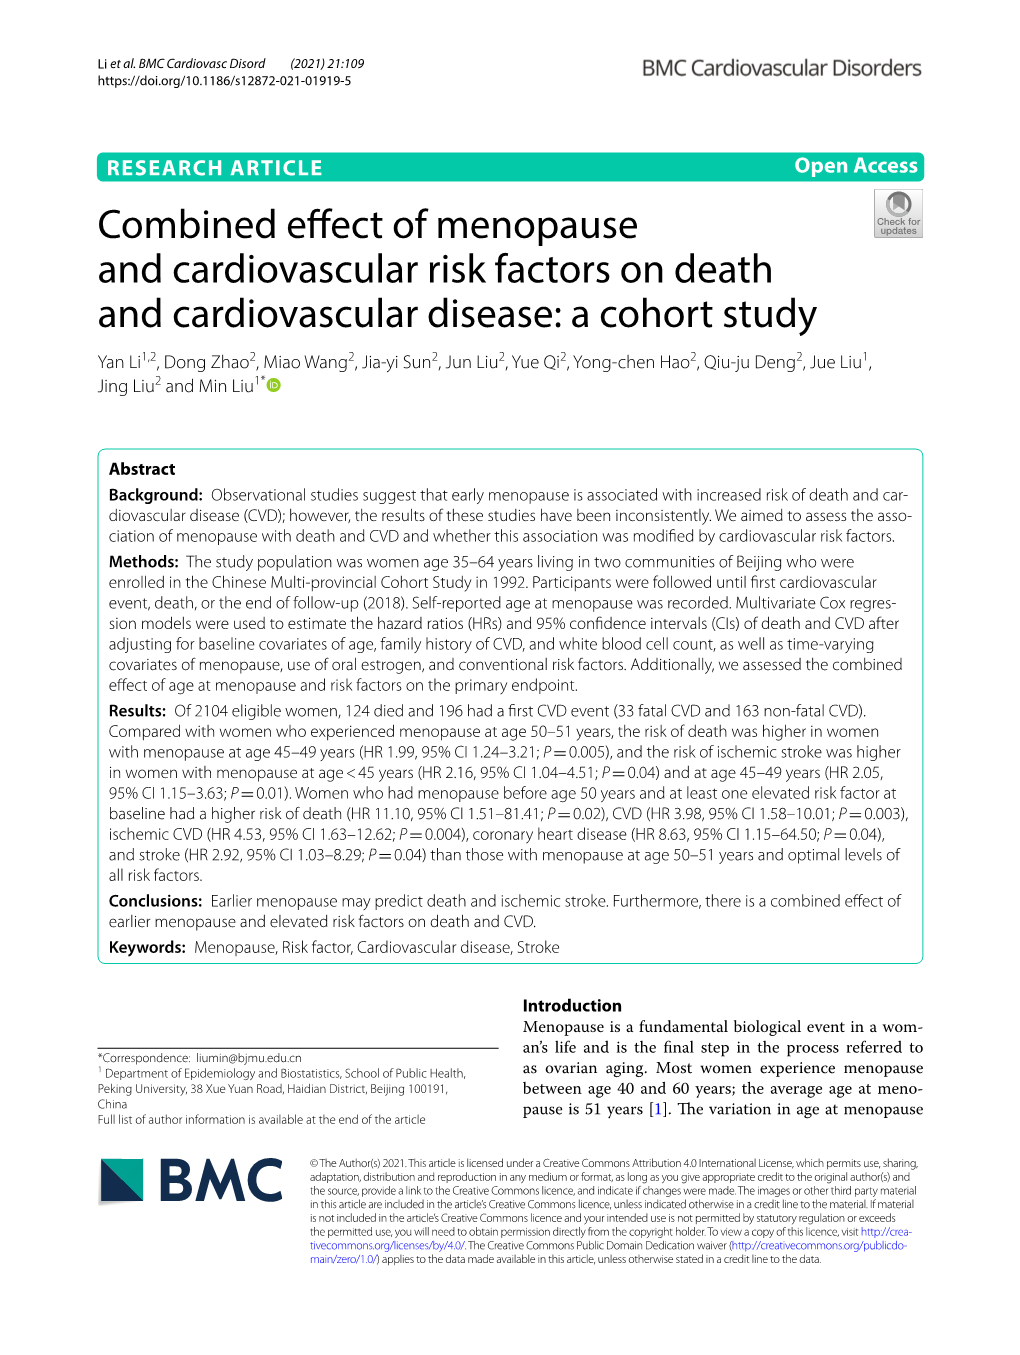 Combined Effect of Menopause And